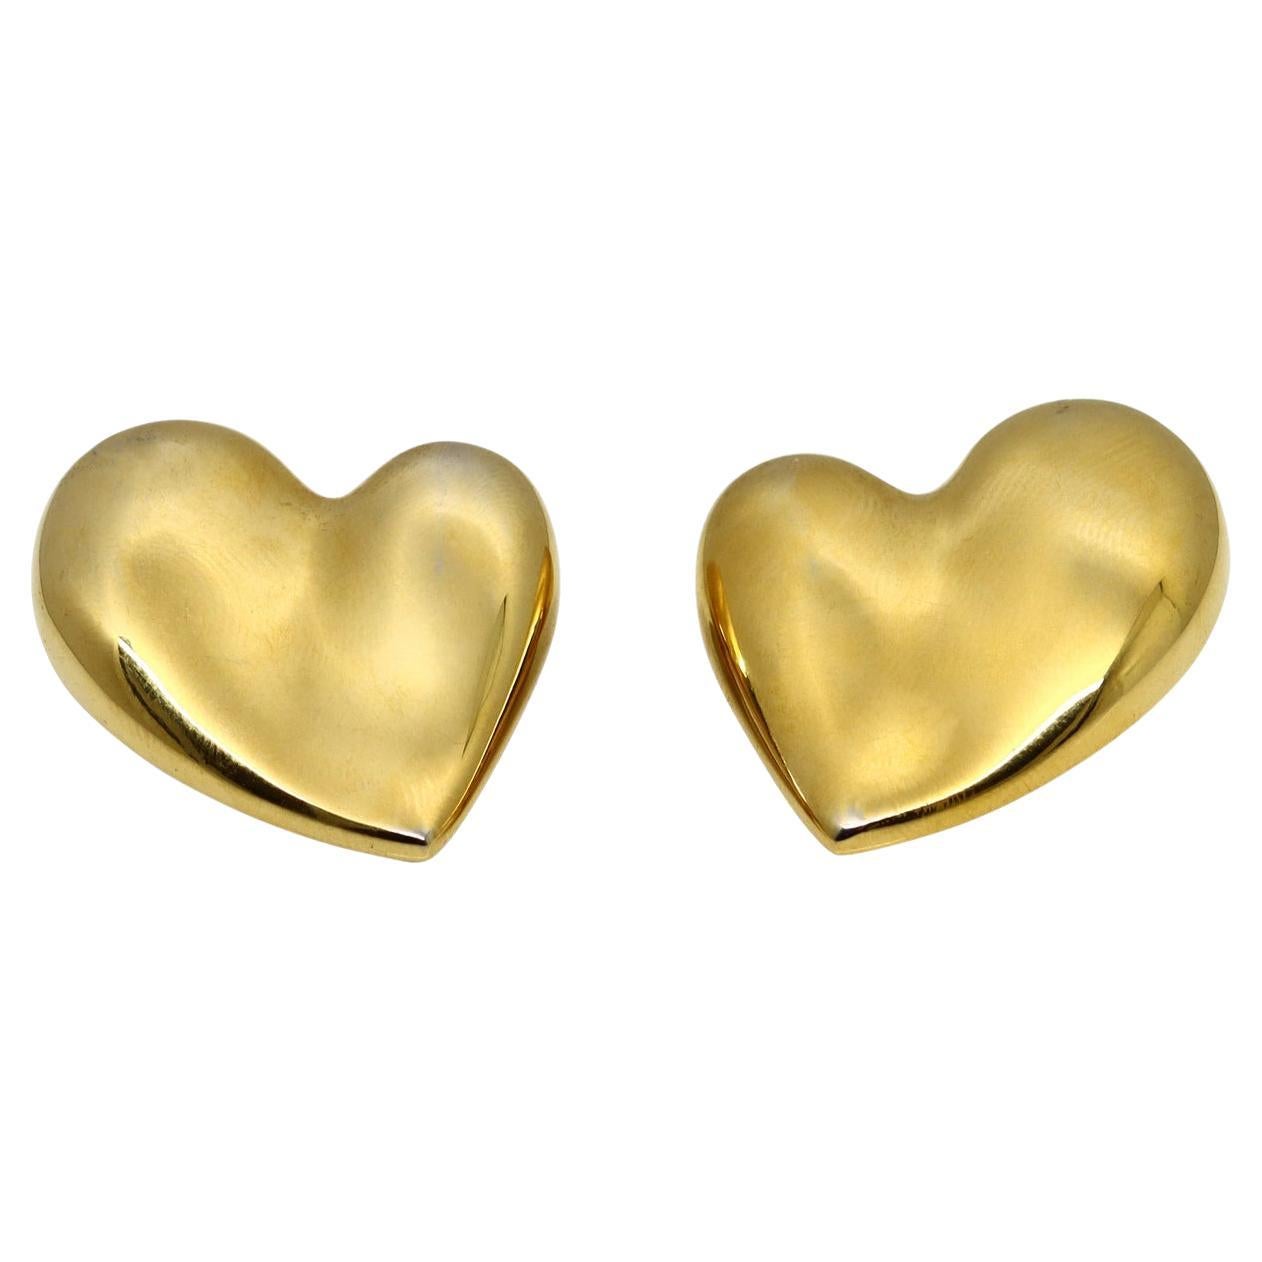 Vintage Carolee Gold Tone Heart Earrings, circa 2000s For Sale